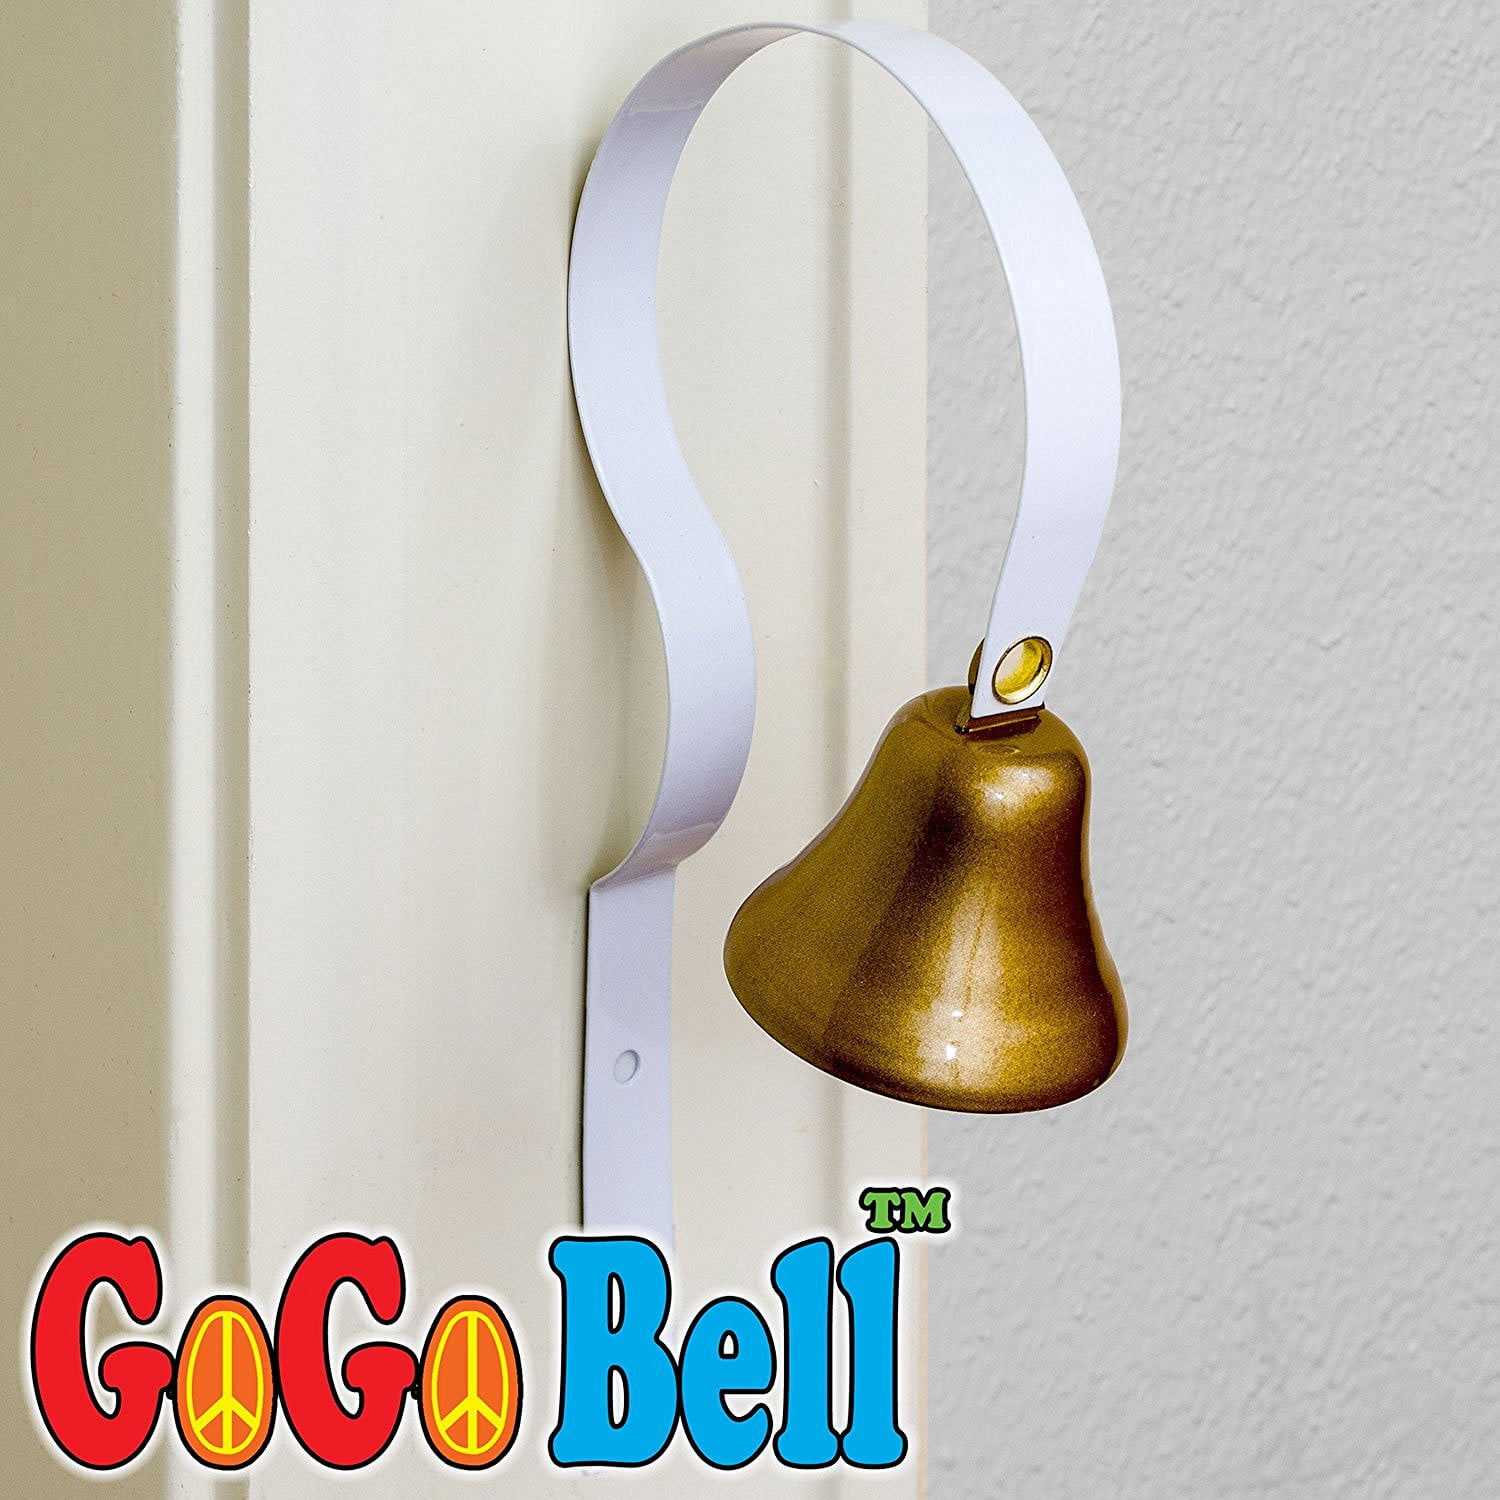 Shop Keepers Bells Dog Doorbell Pet Door Bell with Antique Wall Mounted Metal for Potty Training Housetraining Houserbreaking Home Decoration Nikou Shopkeepers Bell